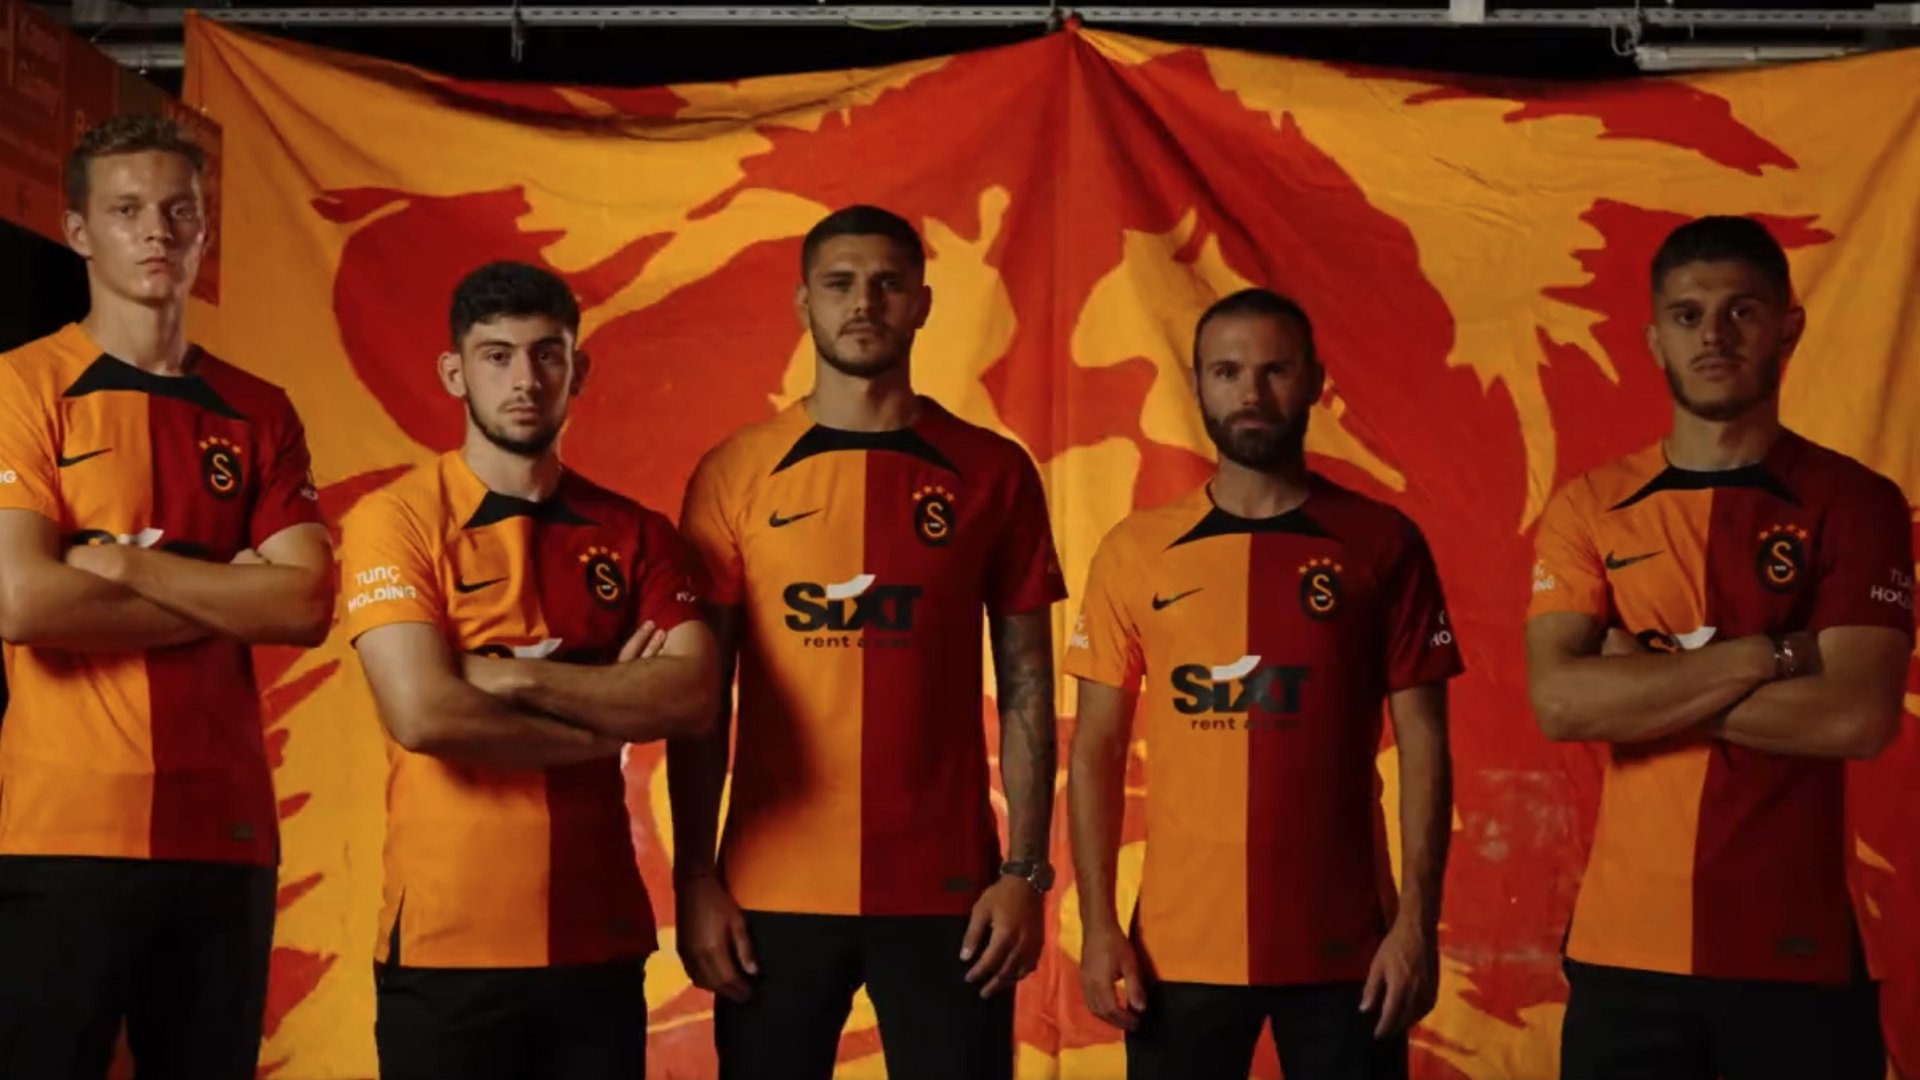 Galatasaray Confirm FIVE New Transfers Including Ex Man Utd Ace Juan Mata And Mauro Icardi In Dramatic Video. The US Sun